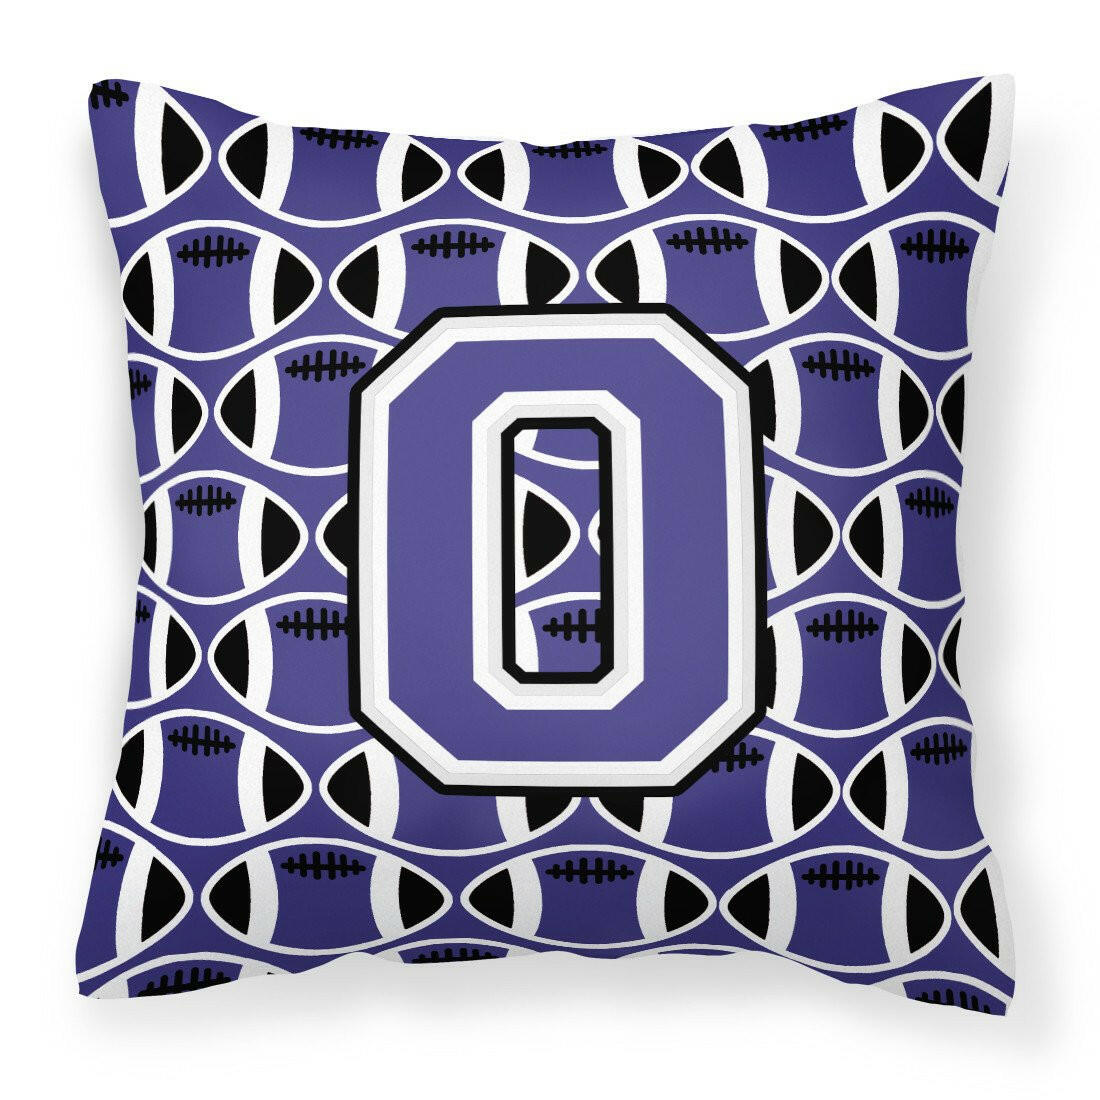 Letter O Football Purple and White Fabric Decorative Pillow CJ1068-OPW1414 by Caroline's Treasures